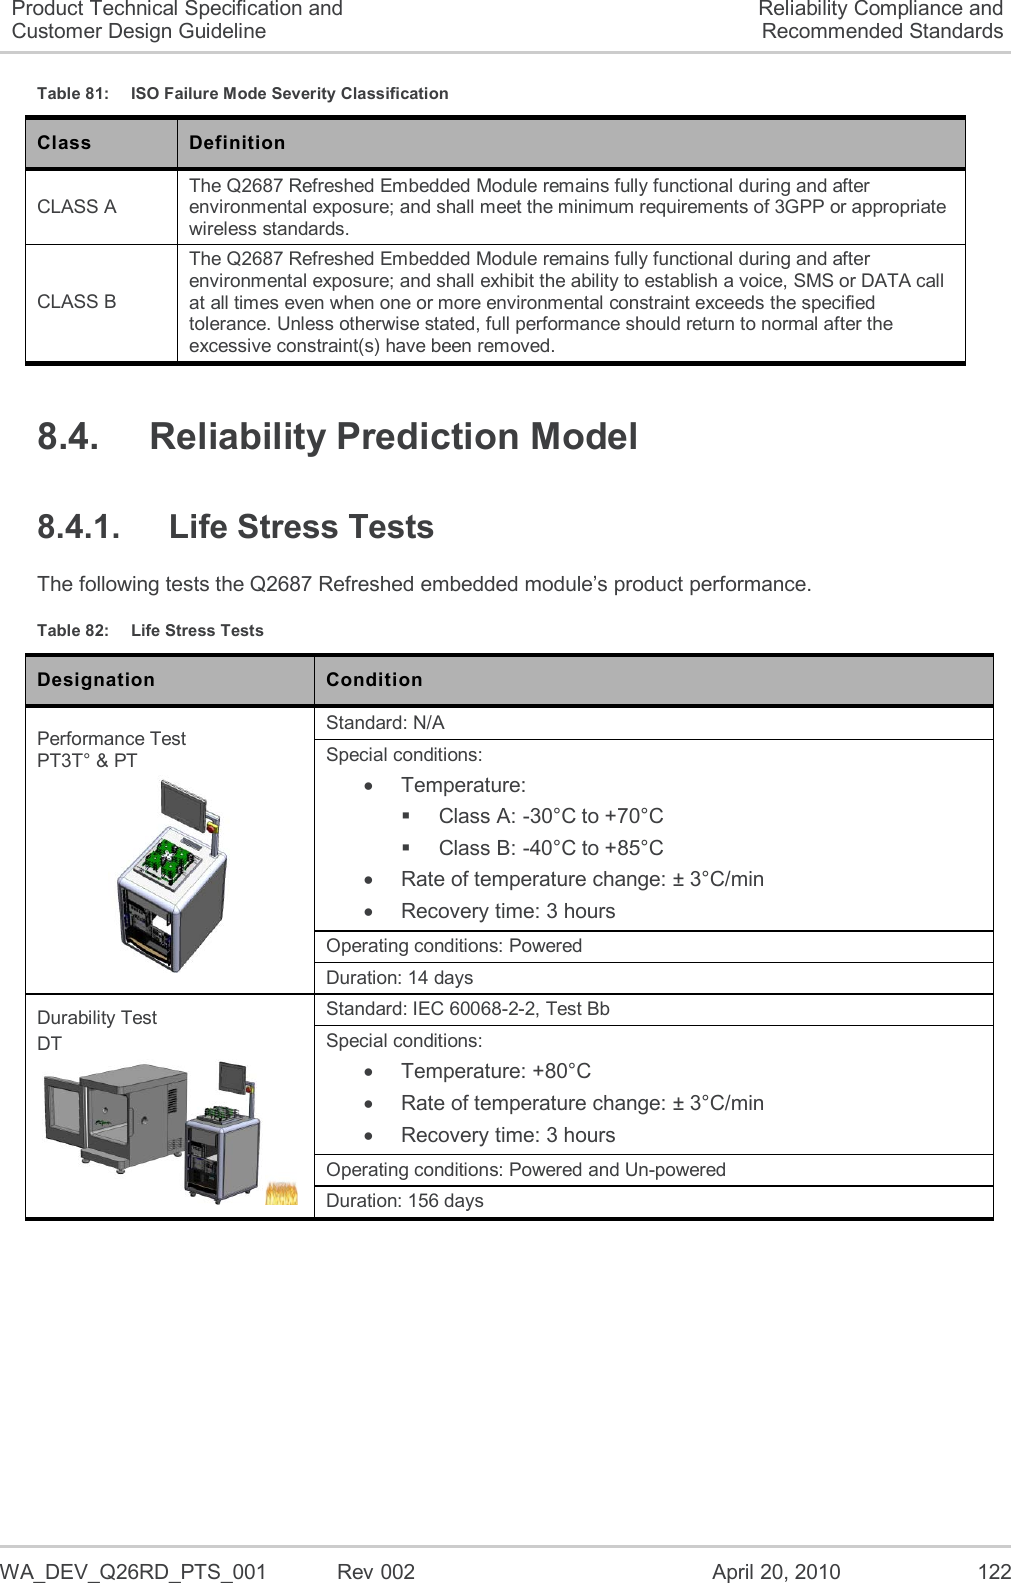   WA_DEV_Q26RD_PTS_001  Rev 002  April 20, 2010 122 Product Technical Specification and Customer Design Guideline Reliability Compliance and Recommended Standards Table 81:  ISO Failure Mode Severity Classification Class Definition CLASS A The Q2687 Refreshed Embedded Module remains fully functional during and after environmental exposure; and shall meet the minimum requirements of 3GPP or appropriate wireless standards. CLASS B The Q2687 Refreshed Embedded Module remains fully functional during and after environmental exposure; and shall exhibit the ability to establish a voice, SMS or DATA call at all times even when one or more environmental constraint exceeds the specified tolerance. Unless otherwise stated, full performance should return to normal after the excessive constraint(s) have been removed. 8.4.  Reliability Prediction Model 8.4.1.  Life Stress Tests The following tests the Q2687 Refreshed embedded module’s product performance. Table 82:  Life Stress Tests Designation Condition Performance Test PT3T° &amp; PT  Standard: N/A Special conditions:   Temperature:   Class A: -30°C to +70°C   Class B: -40°C to +85°C   Rate of temperature change: ± 3°C/min   Recovery time: 3 hours Operating conditions: Powered Duration: 14 days Durability Test DT  Standard: IEC 60068-2-2, Test Bb Special conditions:   Temperature: +80°C   Rate of temperature change: ± 3°C/min   Recovery time: 3 hours Operating conditions: Powered and Un-powered Duration: 156 days 